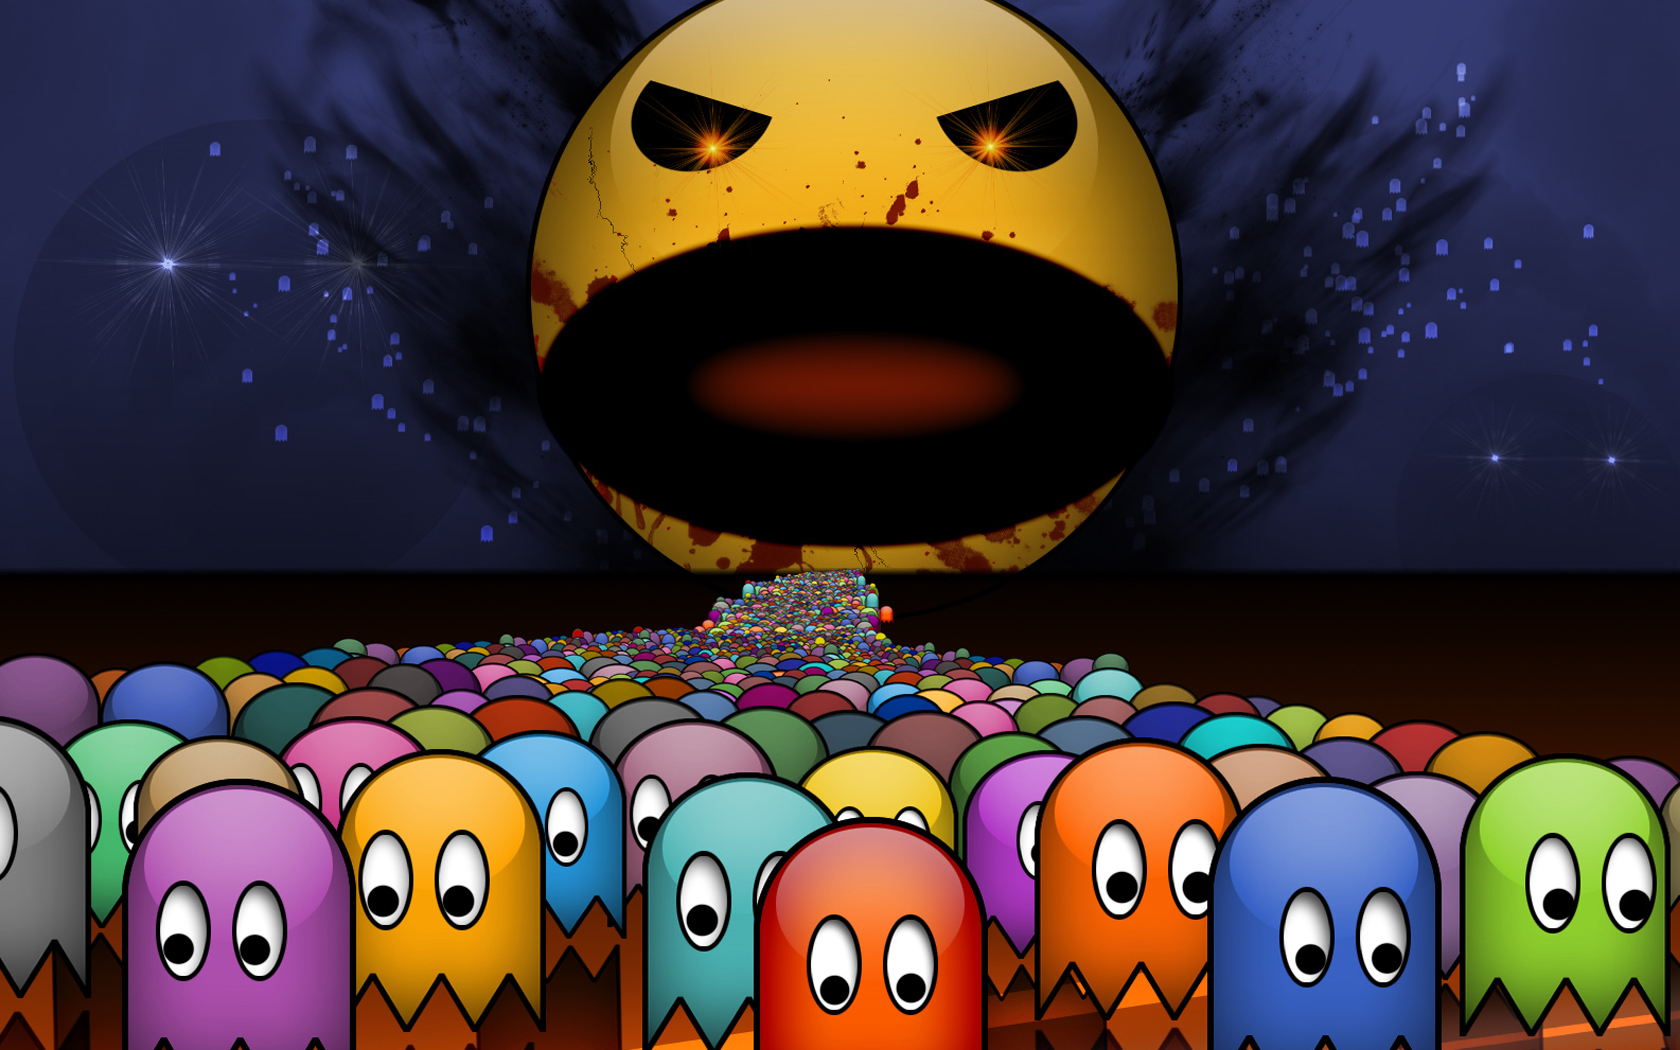 Background Pacman Wallpaper Discover more Cute Developed Japanese Pacman  Video Game wallpaper htt  Samsung wallpaper Man wallpaper Iphone  wallpaper vintage